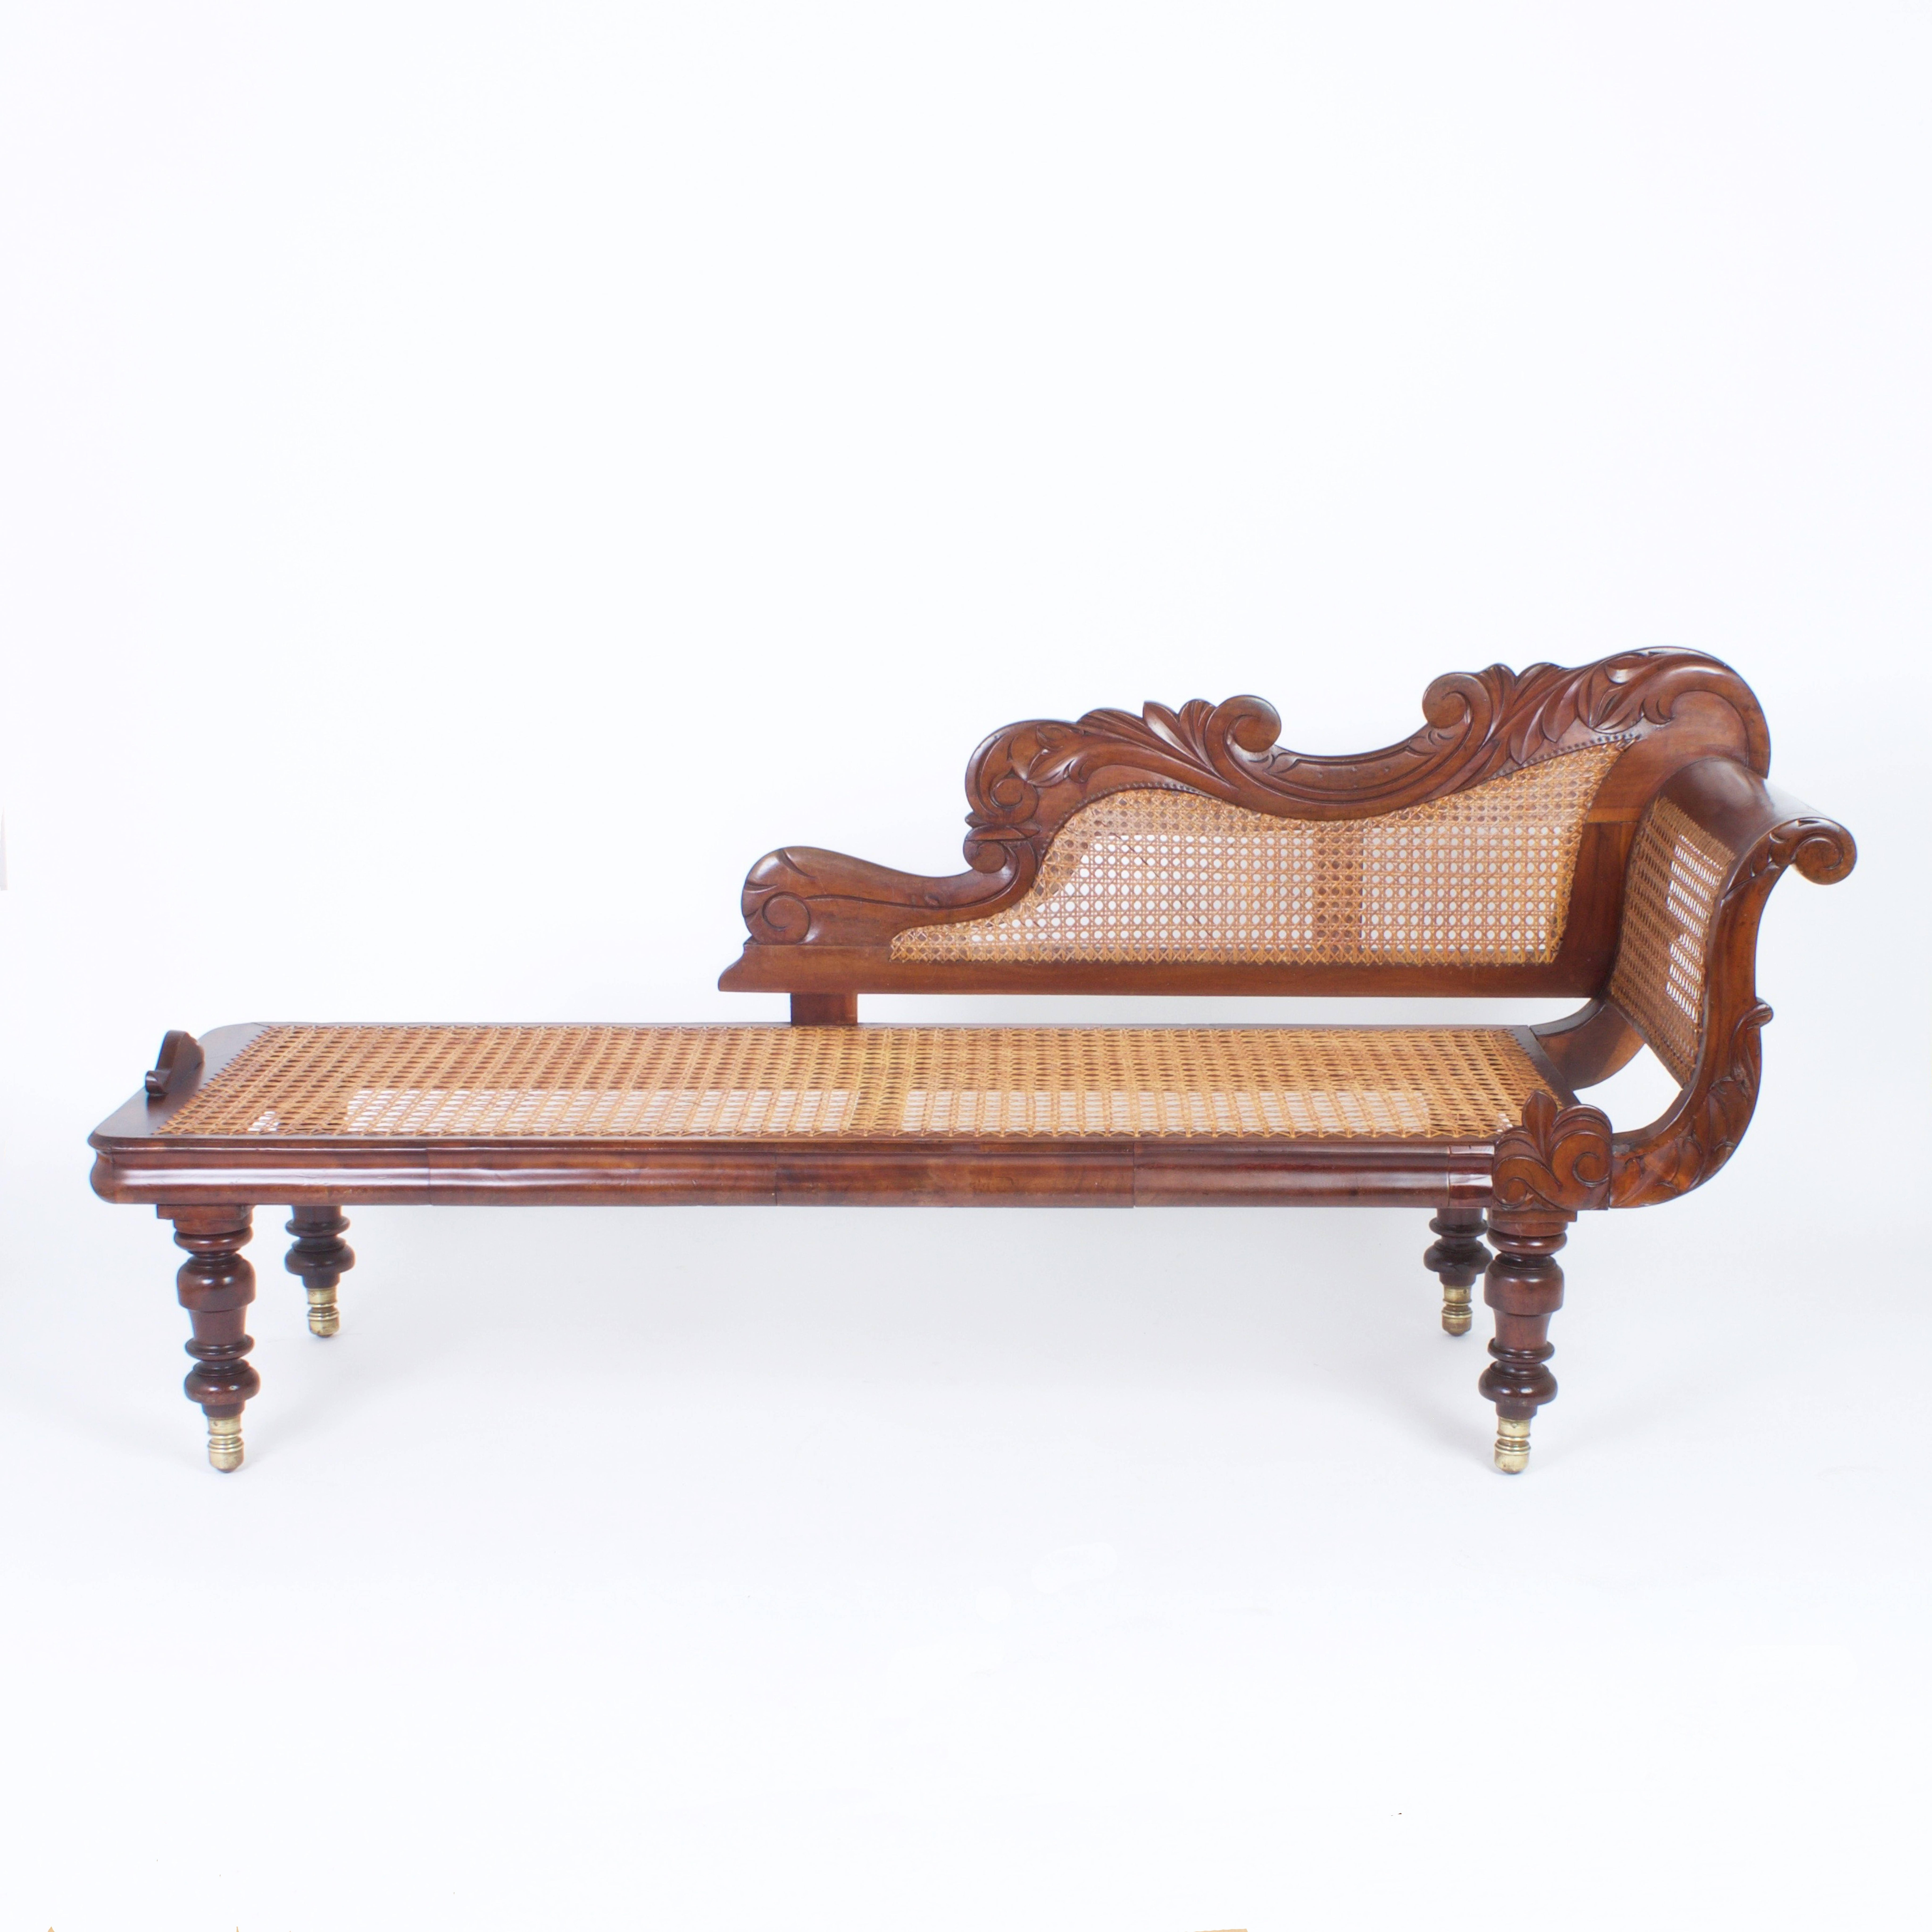 British Colonial antique chaise longue or chaise with beautifully grained mahogany. Featuring hand caned seat, back and end, with the familiar ocean wave carving motif ornamenting the back. The legs are turned, ending in brass caps. This rare piece